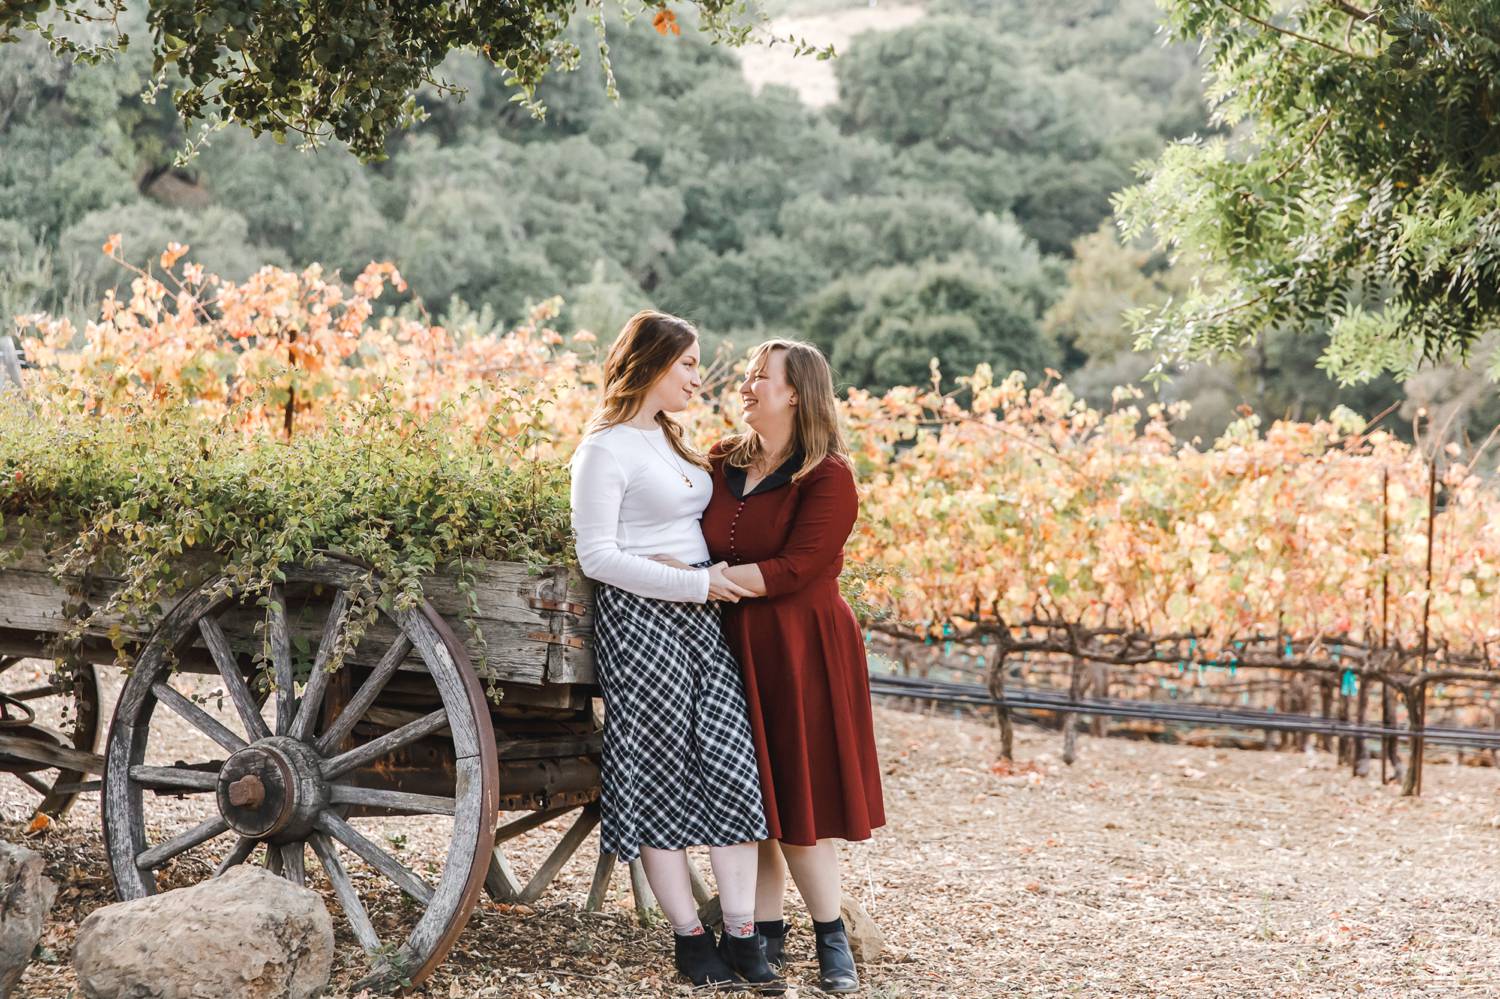 Two women in love stand close together, looking at each other as they lean against an old wagon full of herbs.